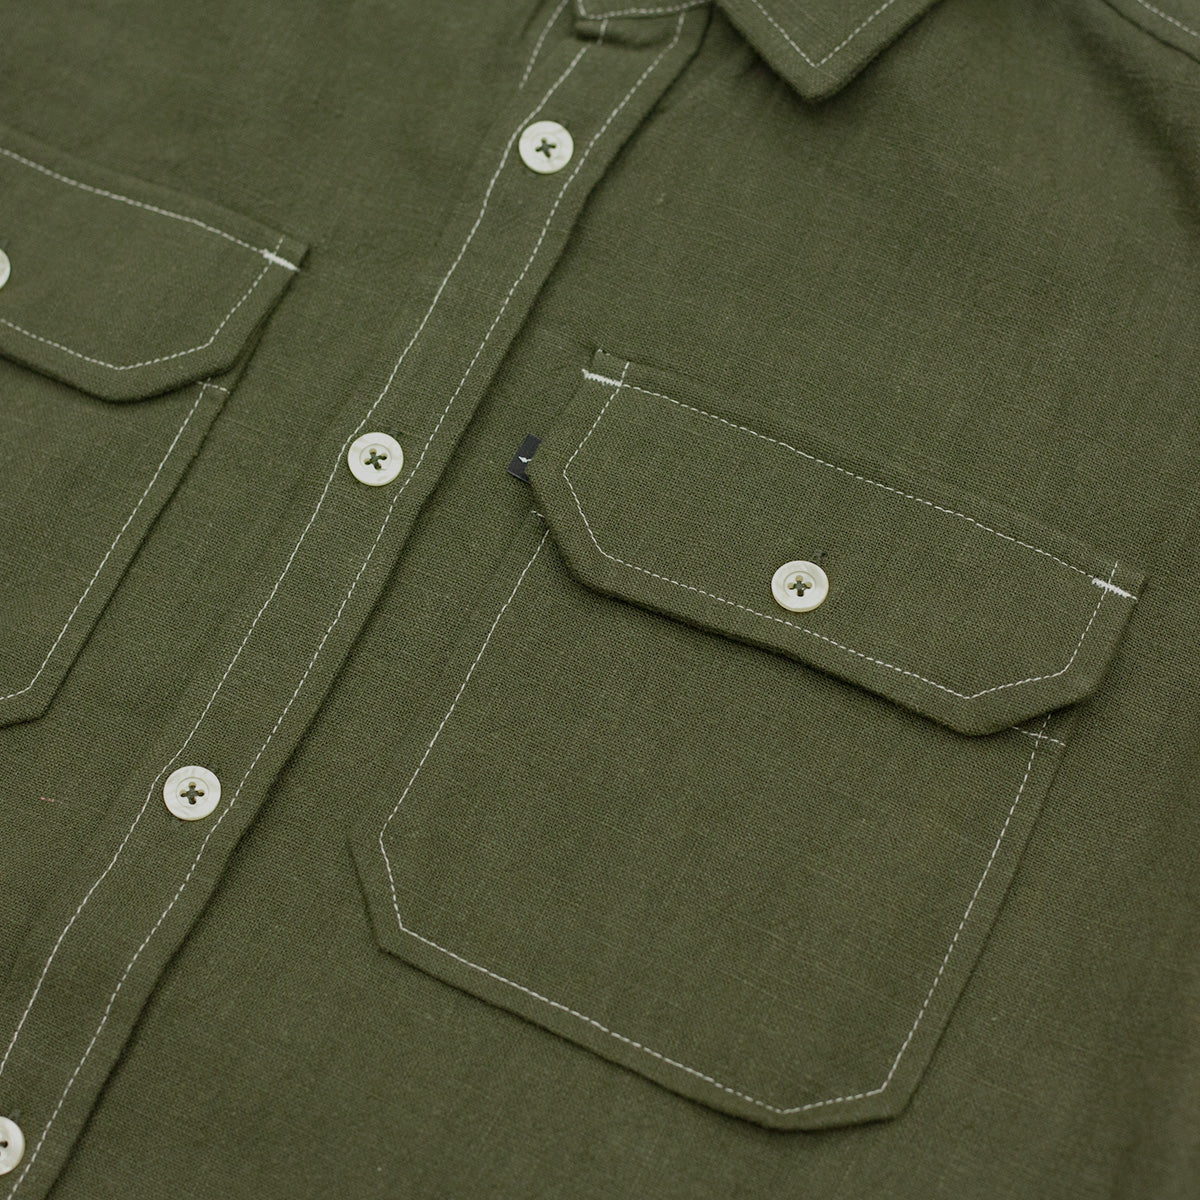 PASS~PORT "WORKERS CONTRAST" L/S SHIRT OLIVE